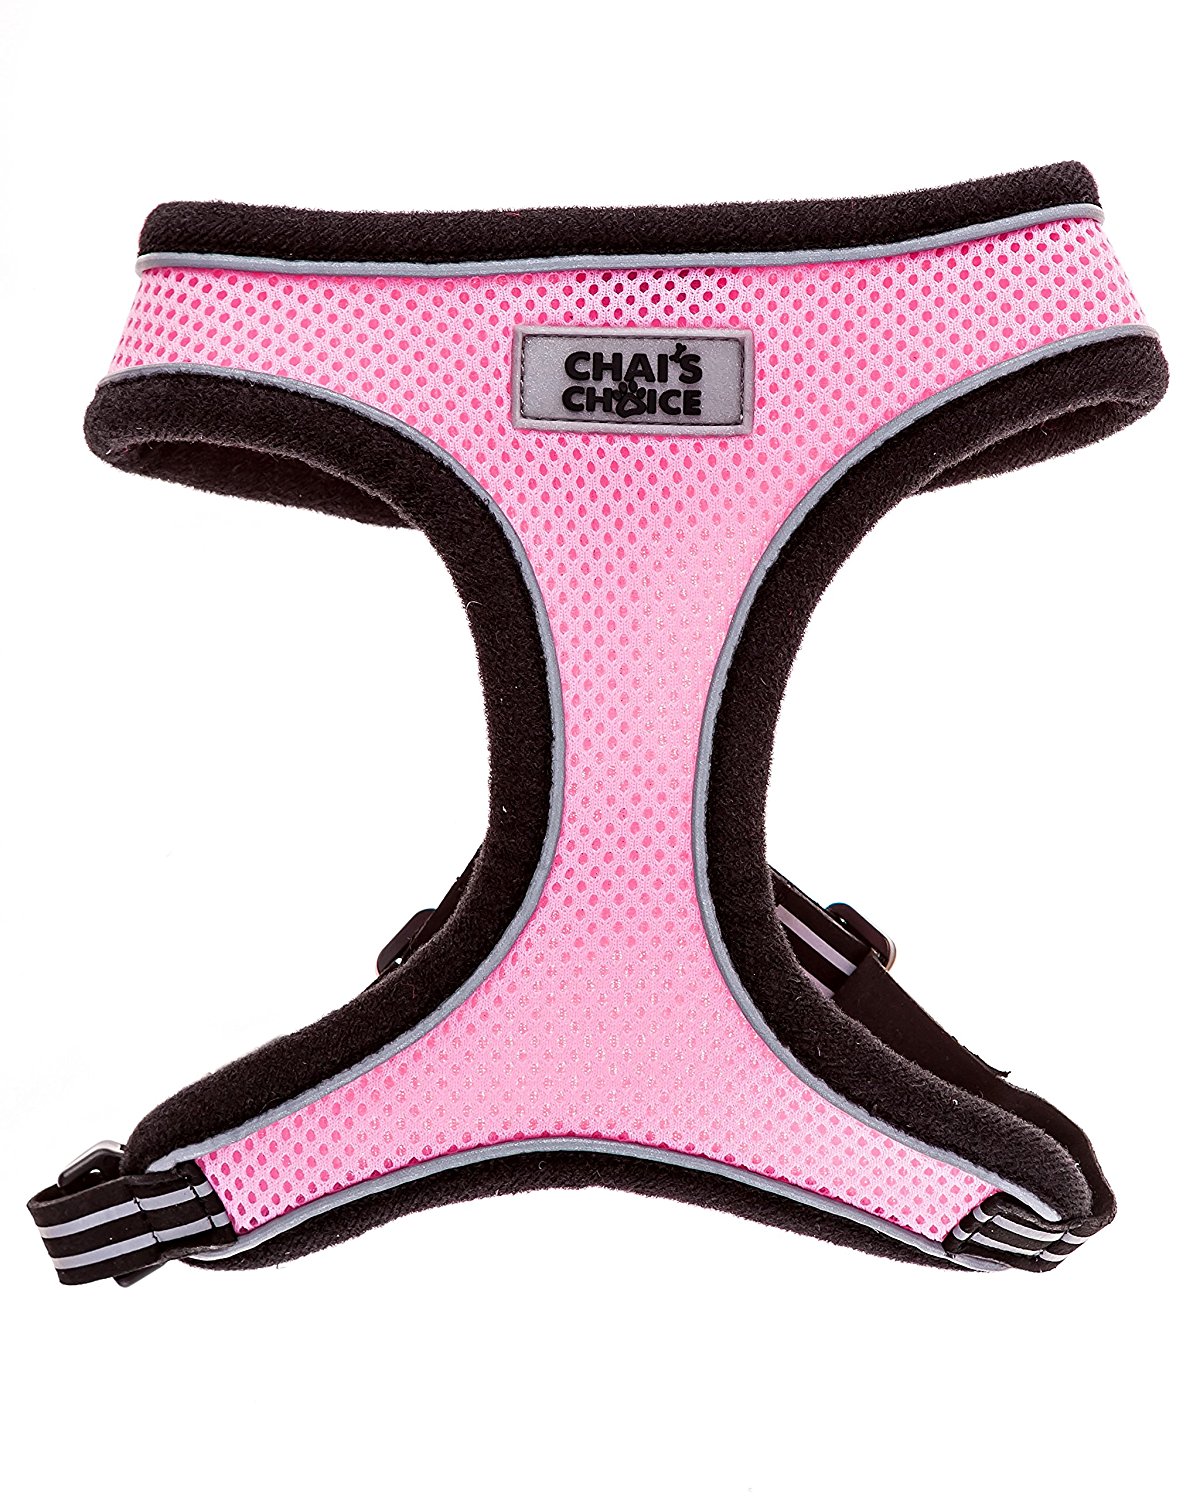 Chai’s Choice Easy Walk Dog Harness Vest for Small and Medium Dogs - Chai's Choice